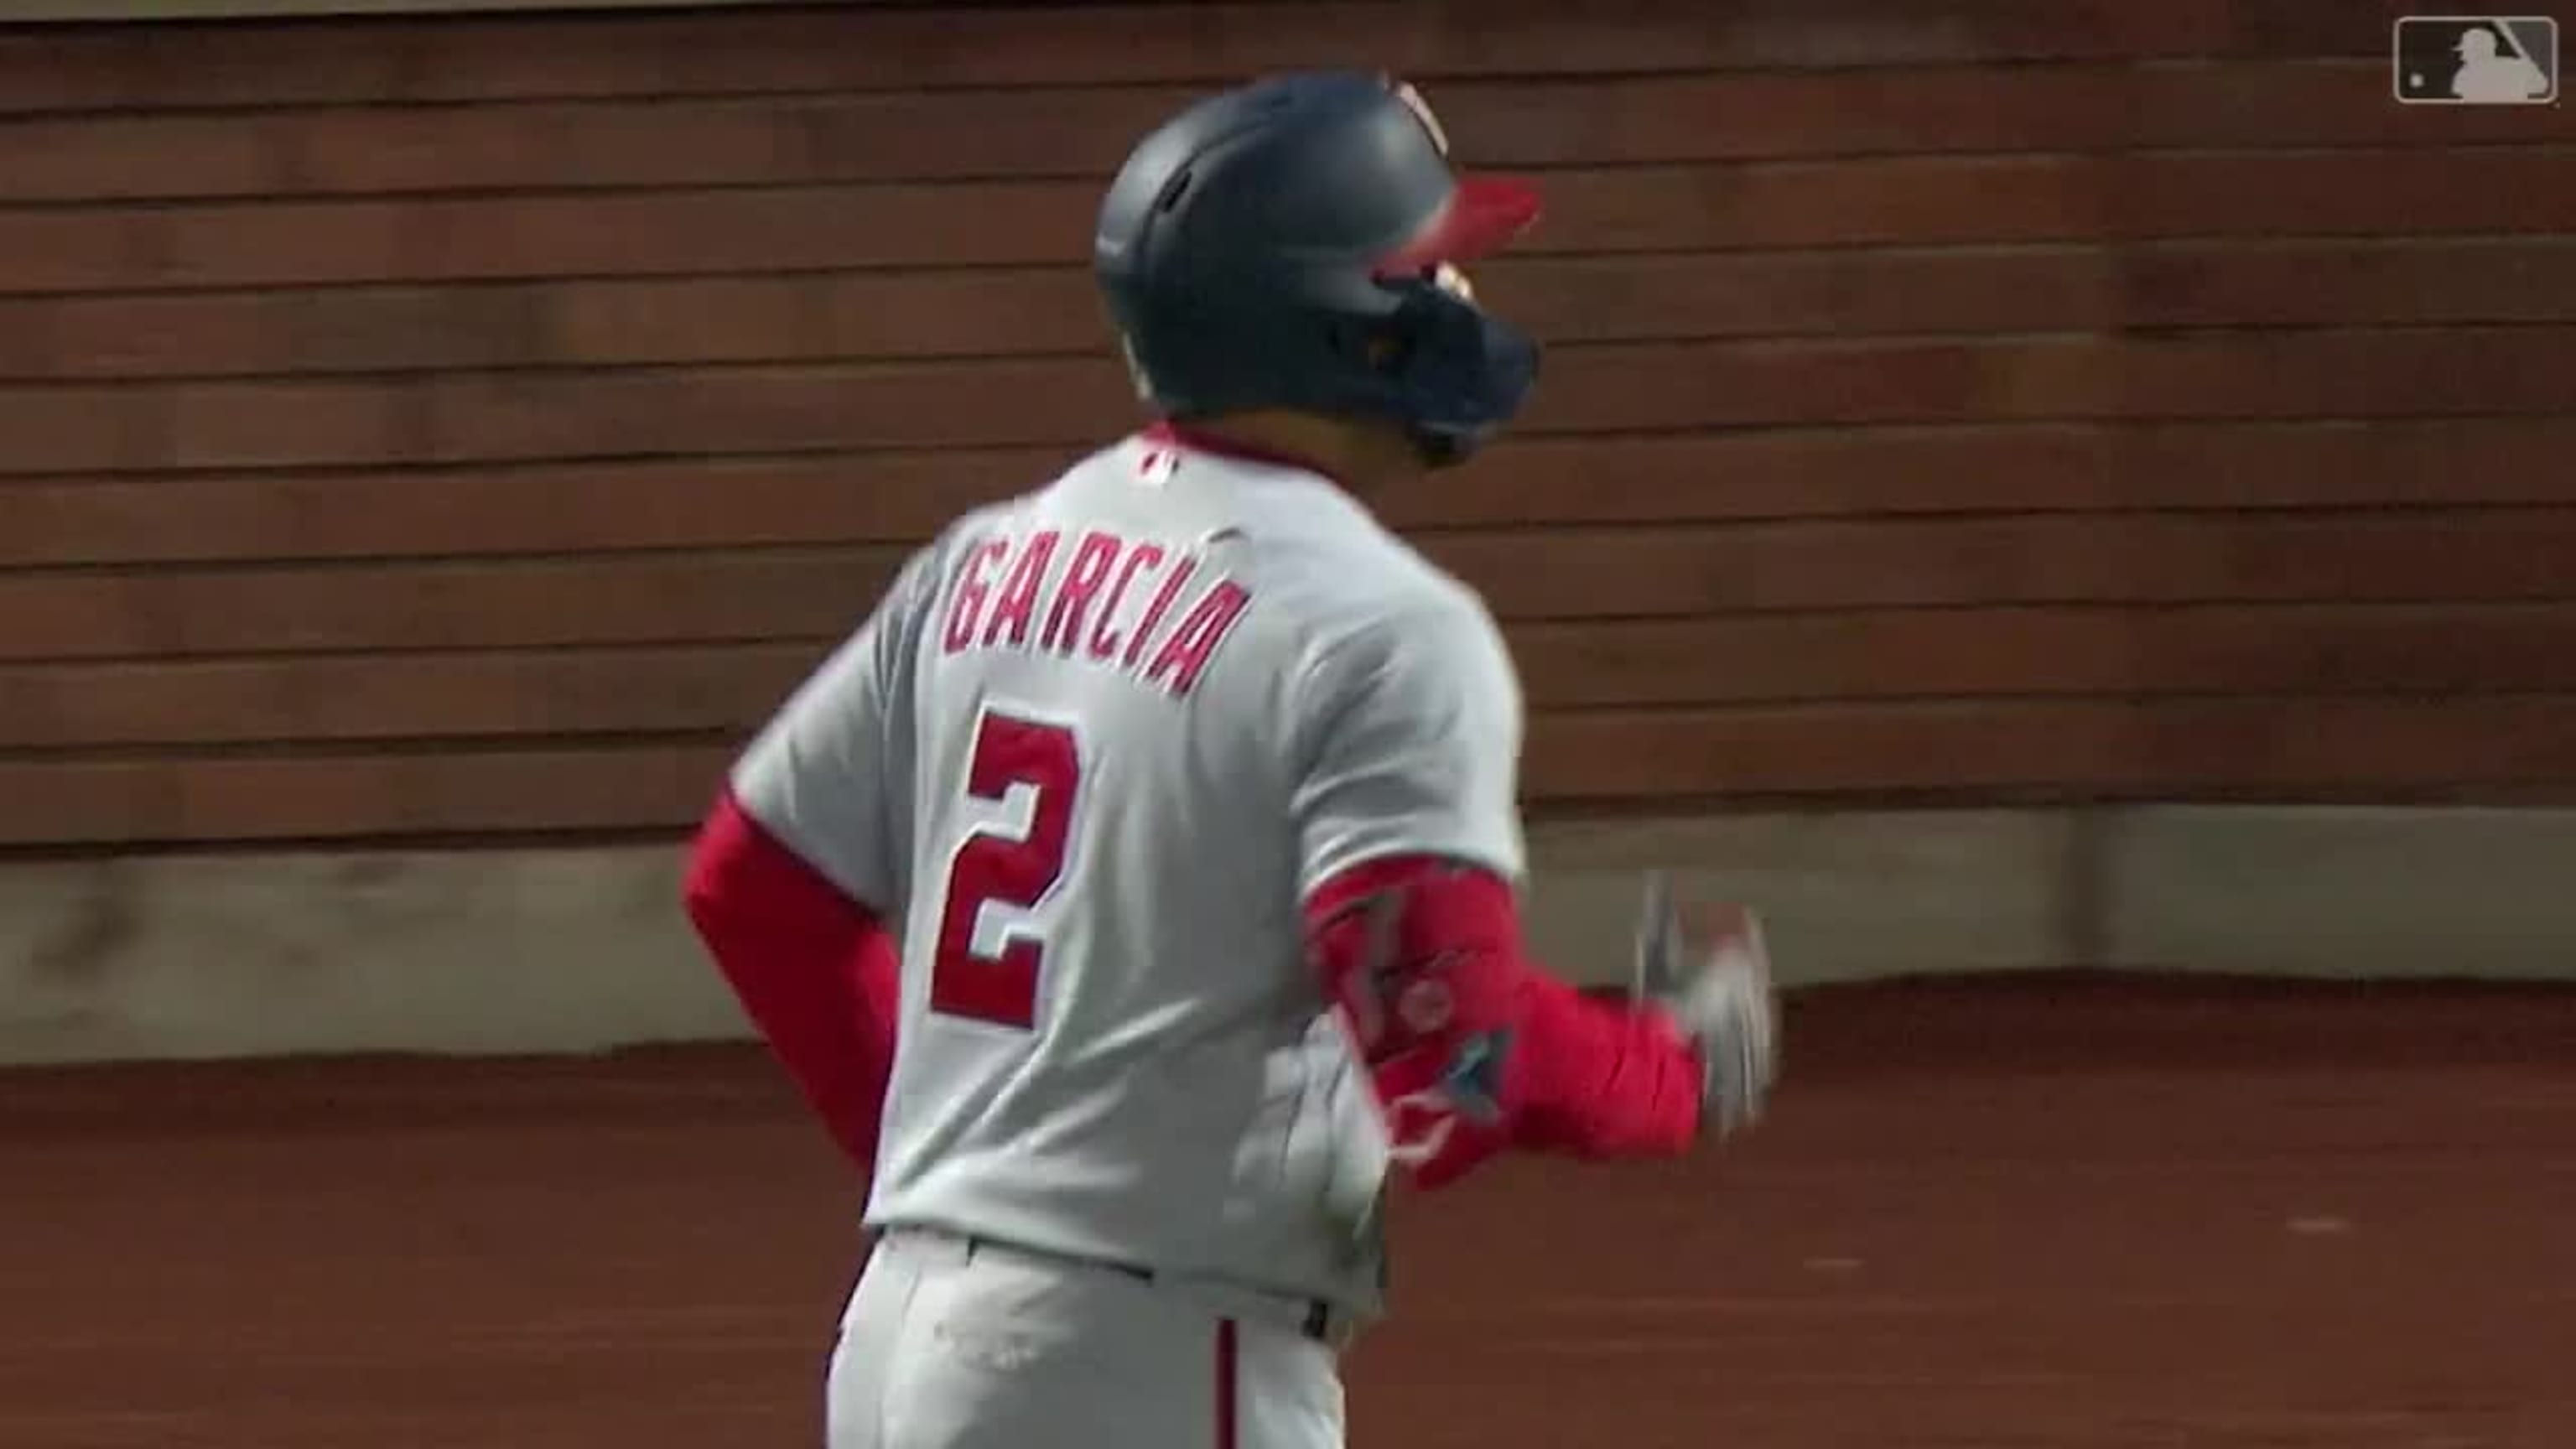 CJ Abrams hits first career grand slam in Nationals' loss